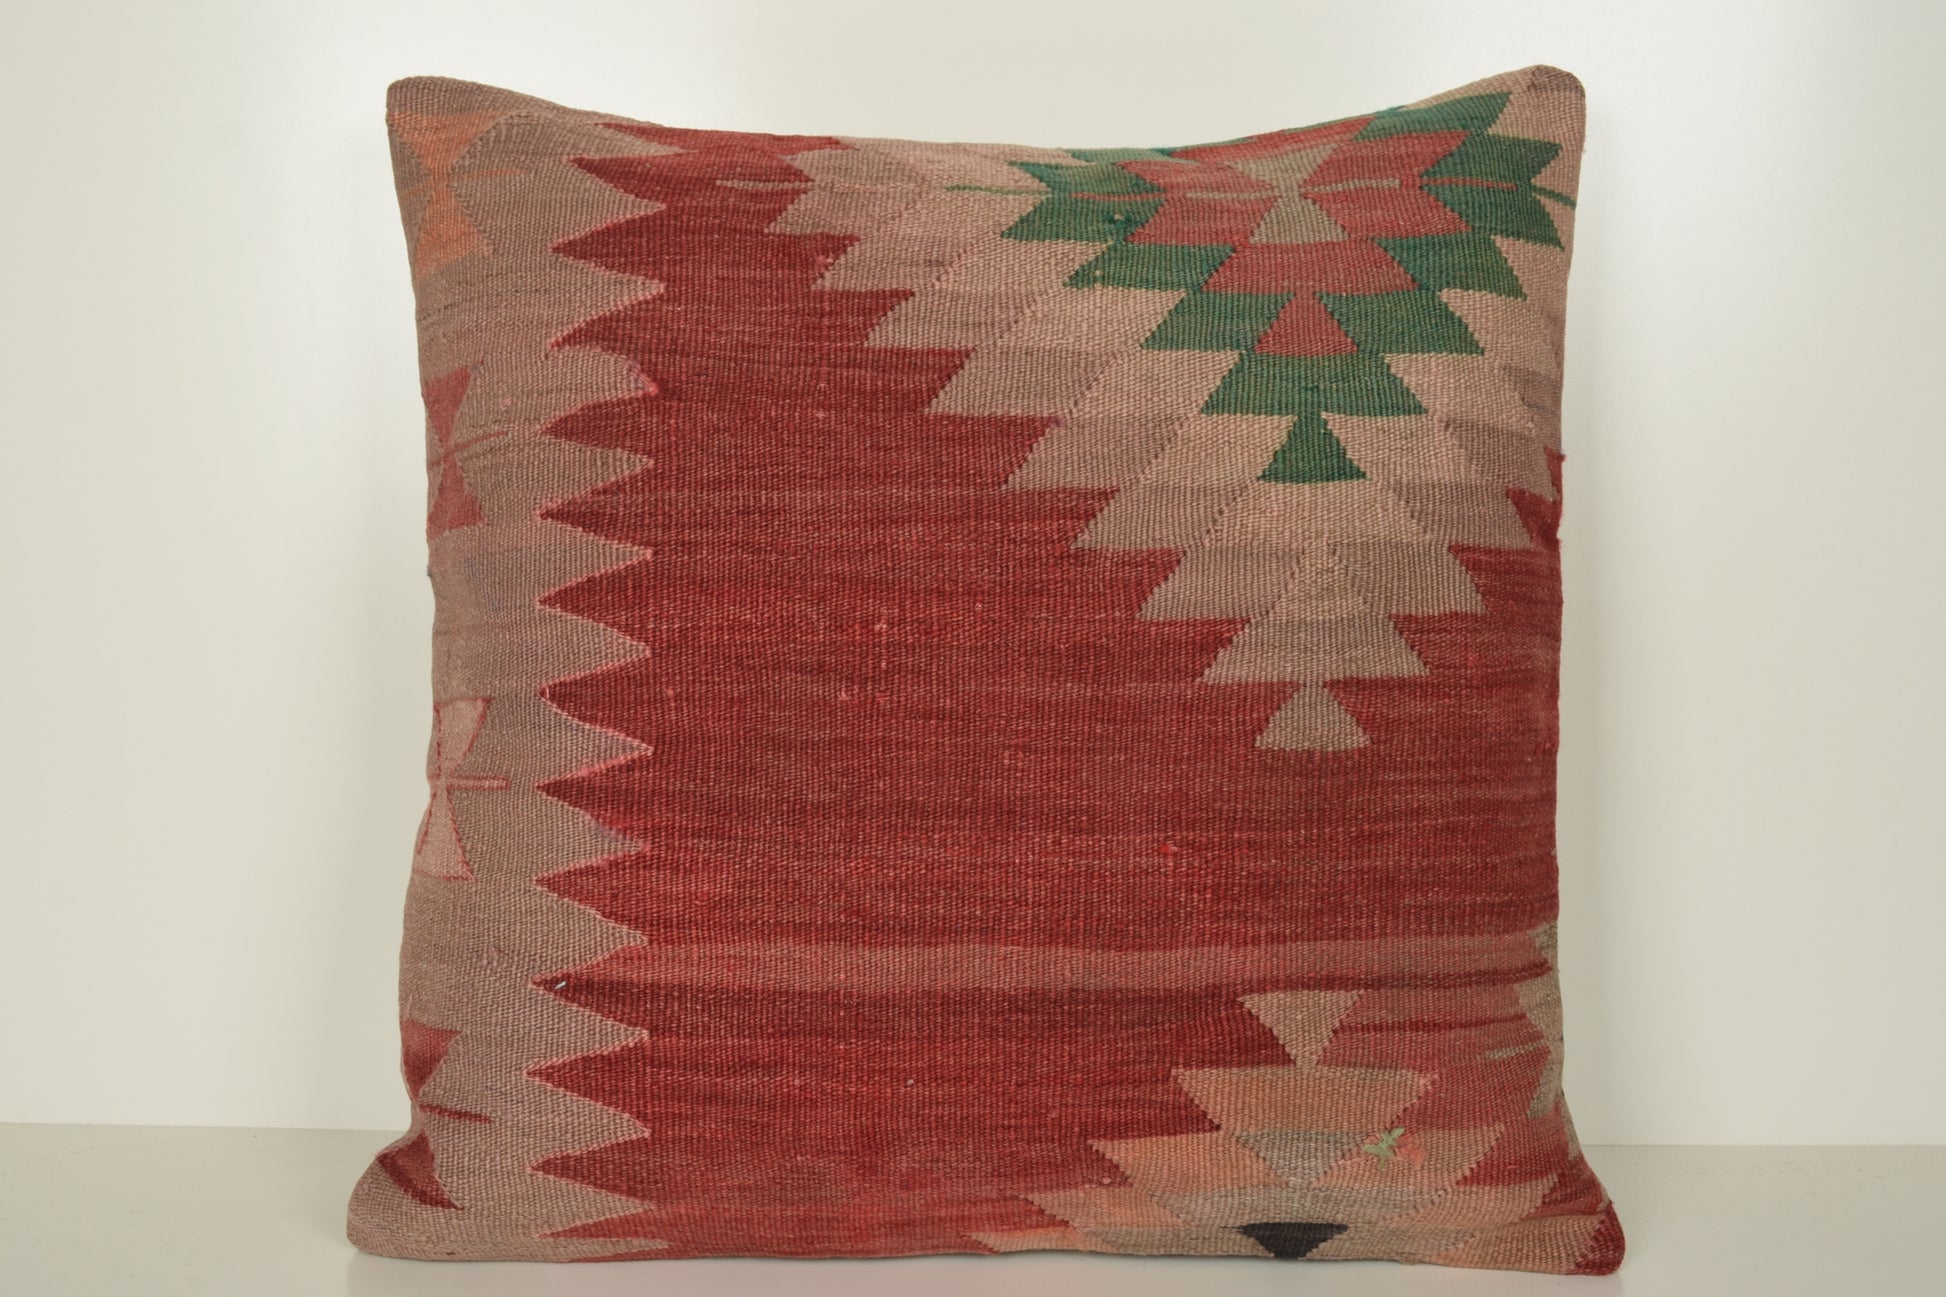 Kilim Pillow Covers Coral A00821 Economical throw pillow cover 24x24